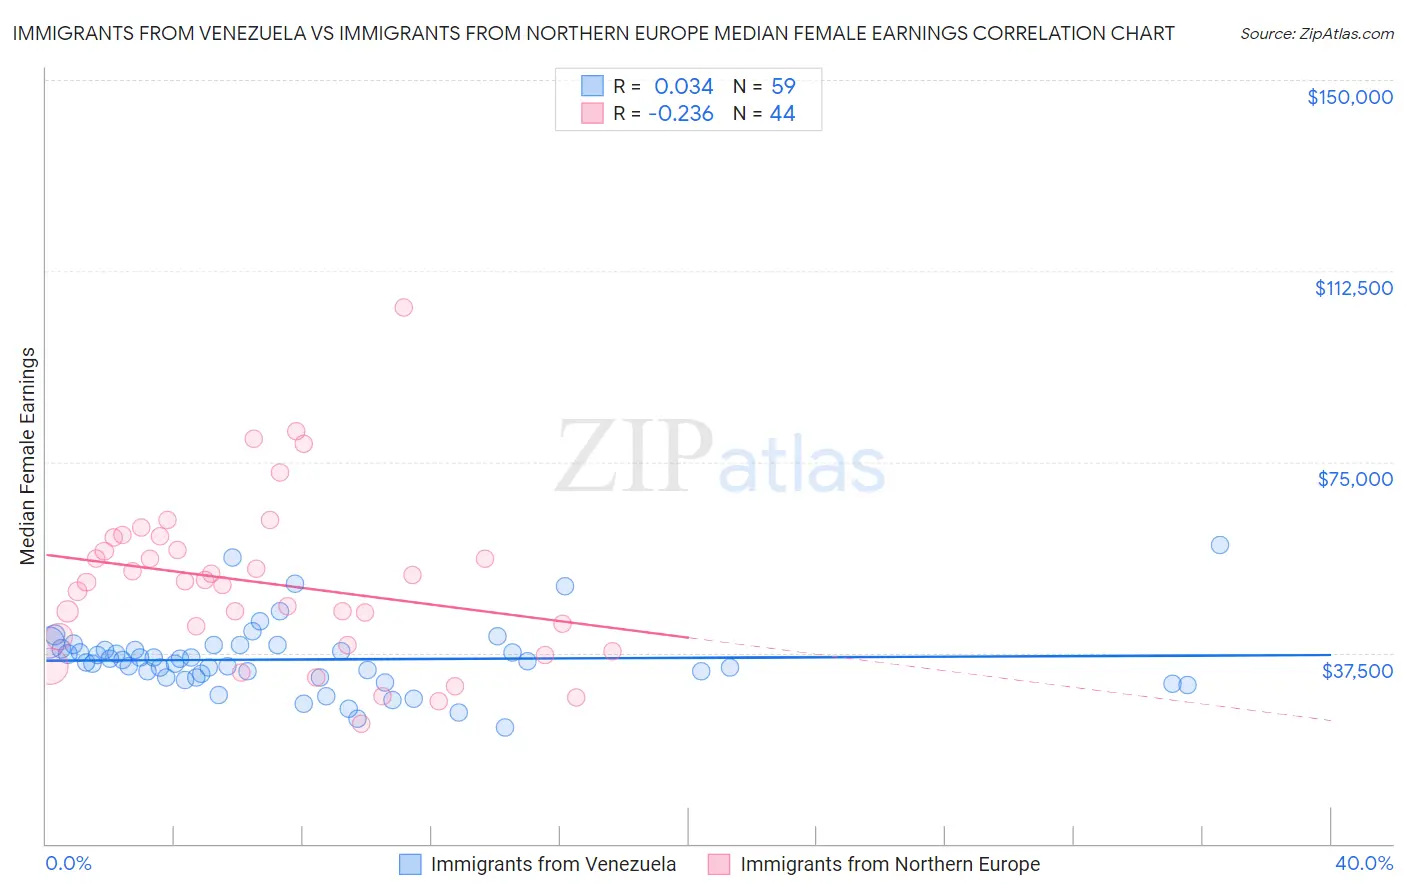 Immigrants from Venezuela vs Immigrants from Northern Europe Median Female Earnings